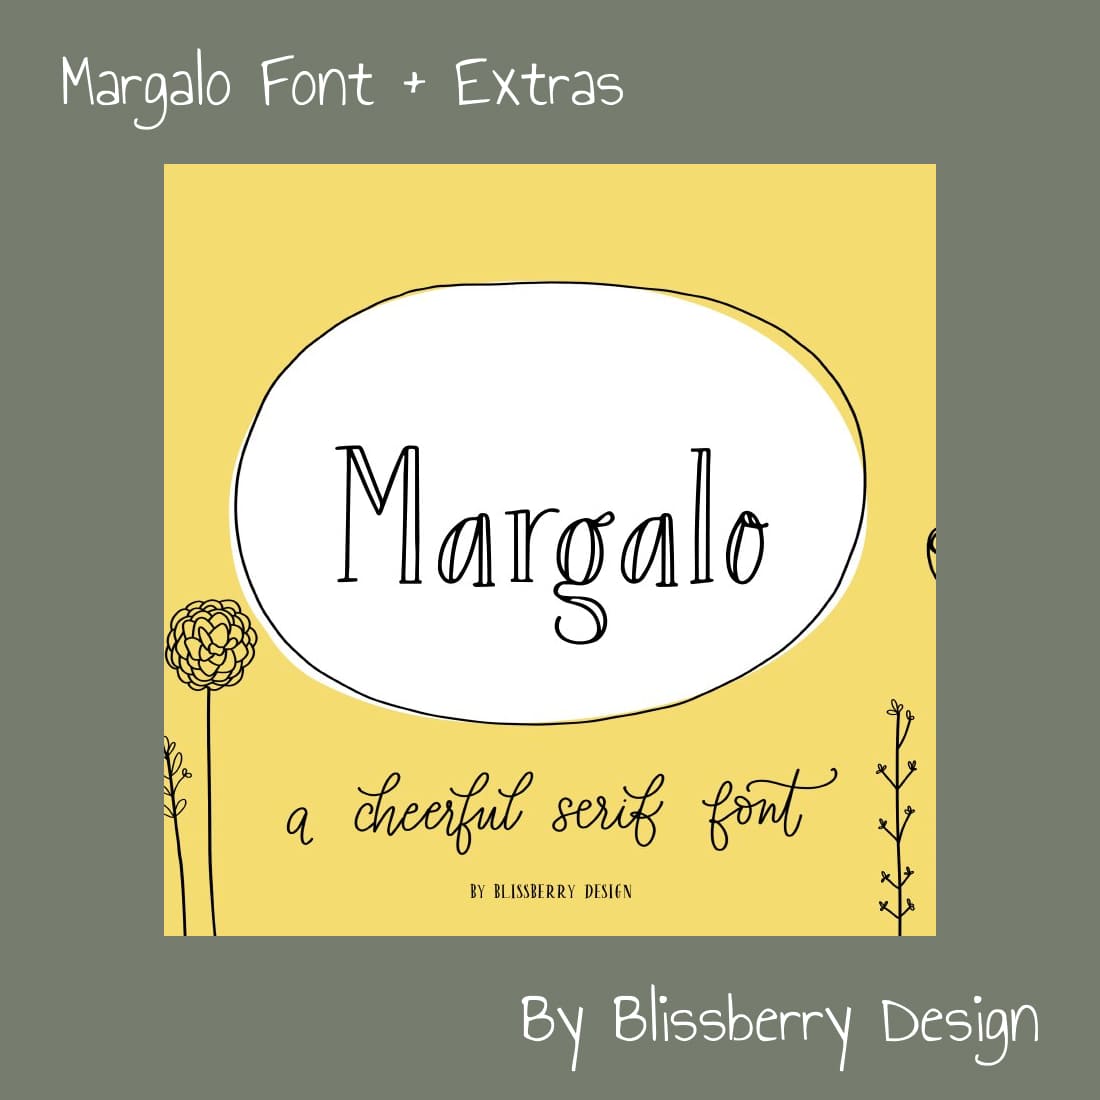 Margalo Font + Extras - A Cheerful Serif Font By Blissberry Design.